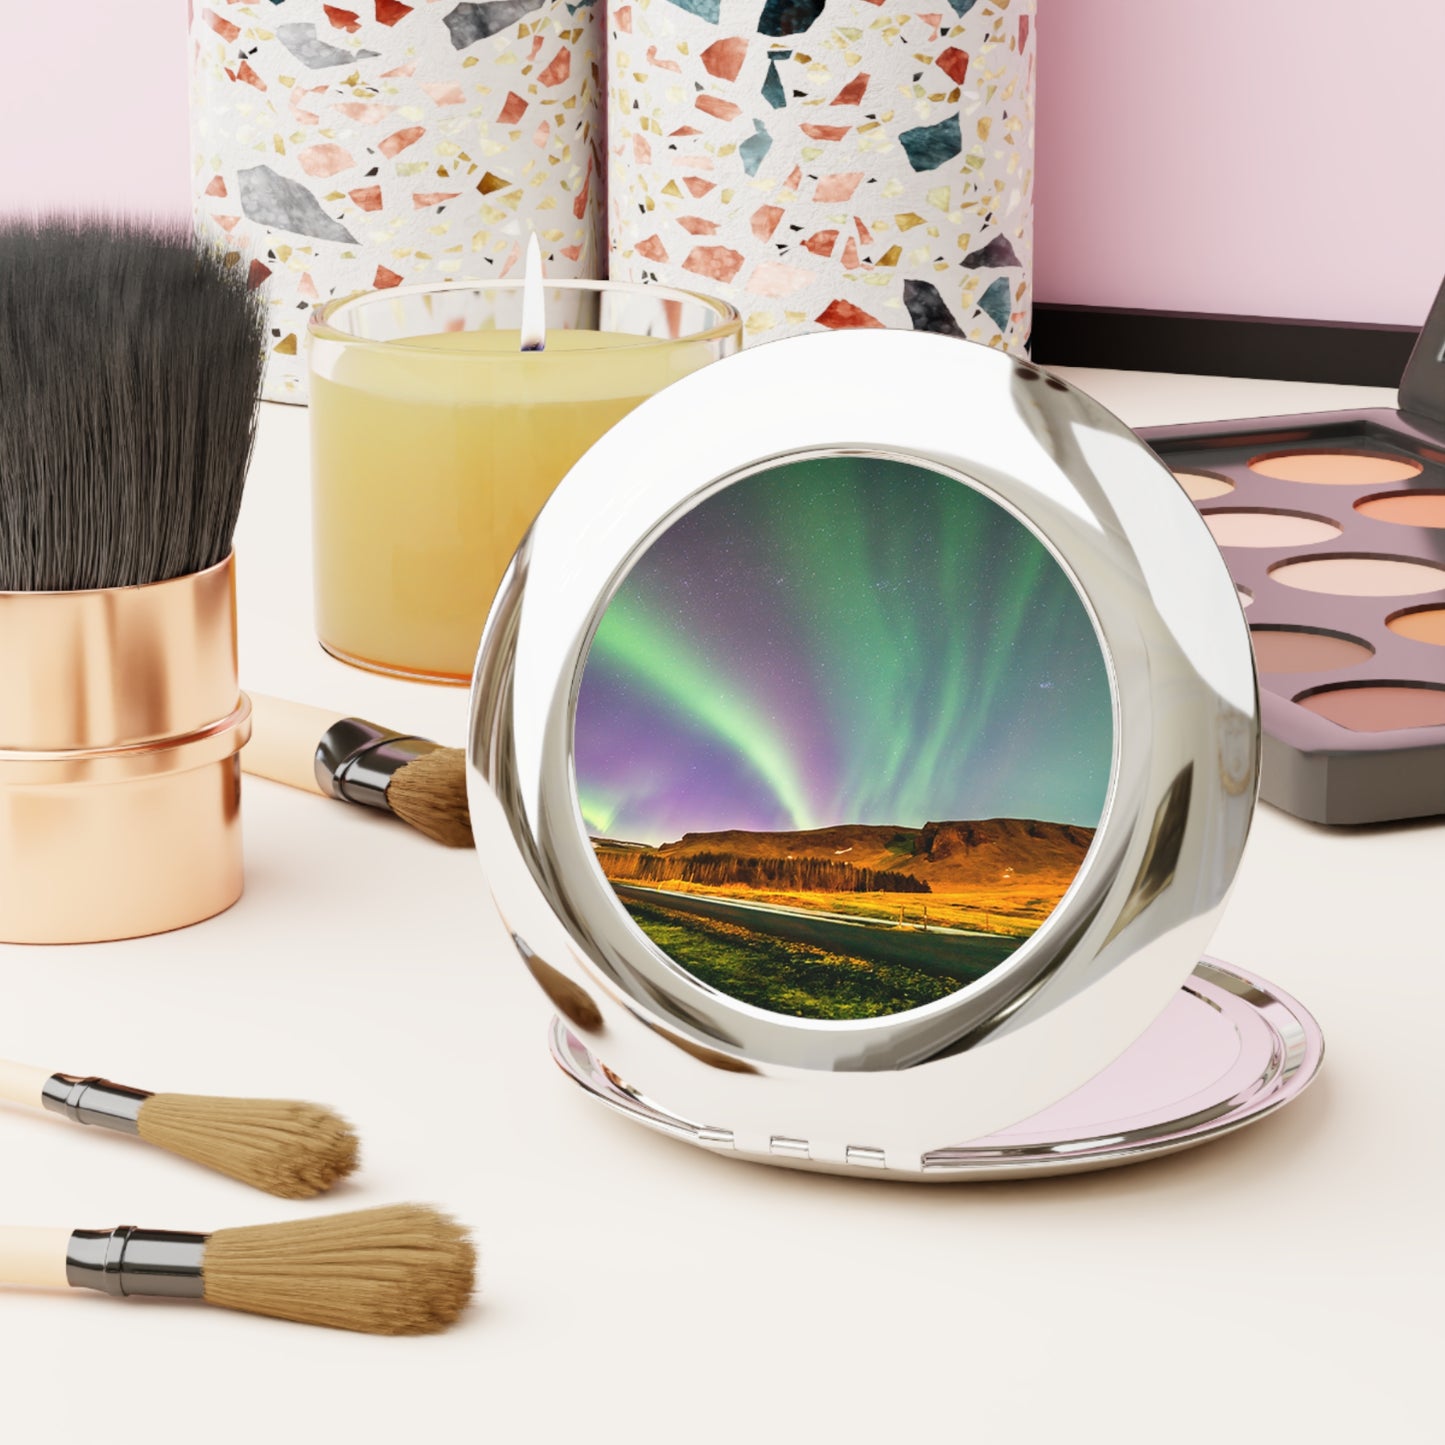 Unique Aurora Borealis Compact Travel Mirror - Northern Light Travel Accessories - Glossy Makeup Gadget - Perfect Aurora Lovers Gift 5